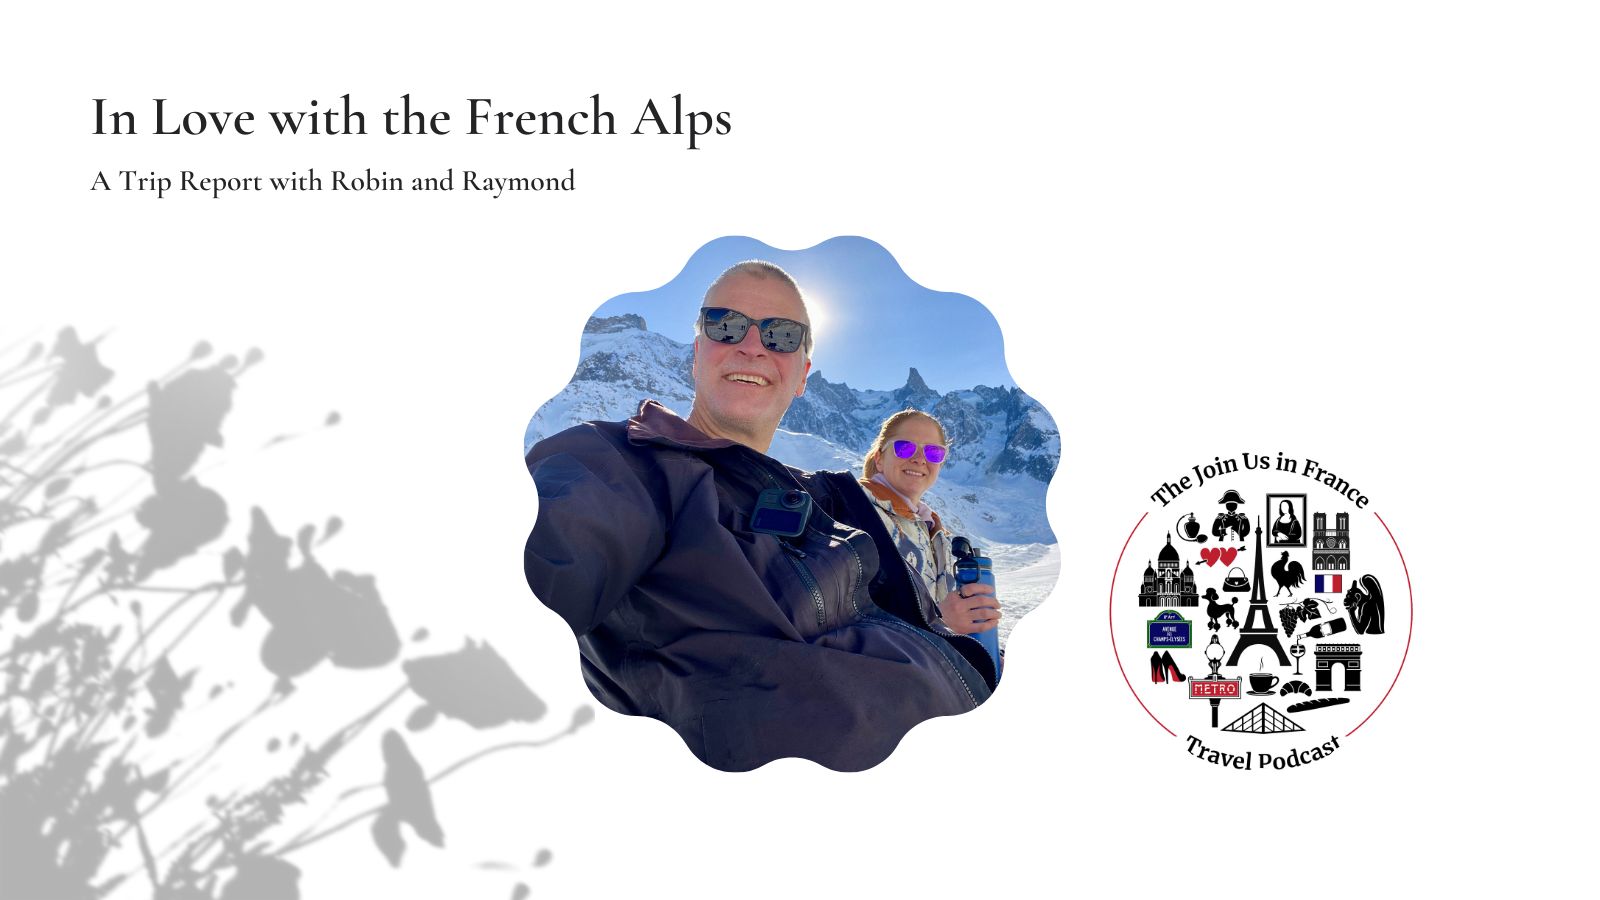 Robin and Raymond are in love with the French Alps